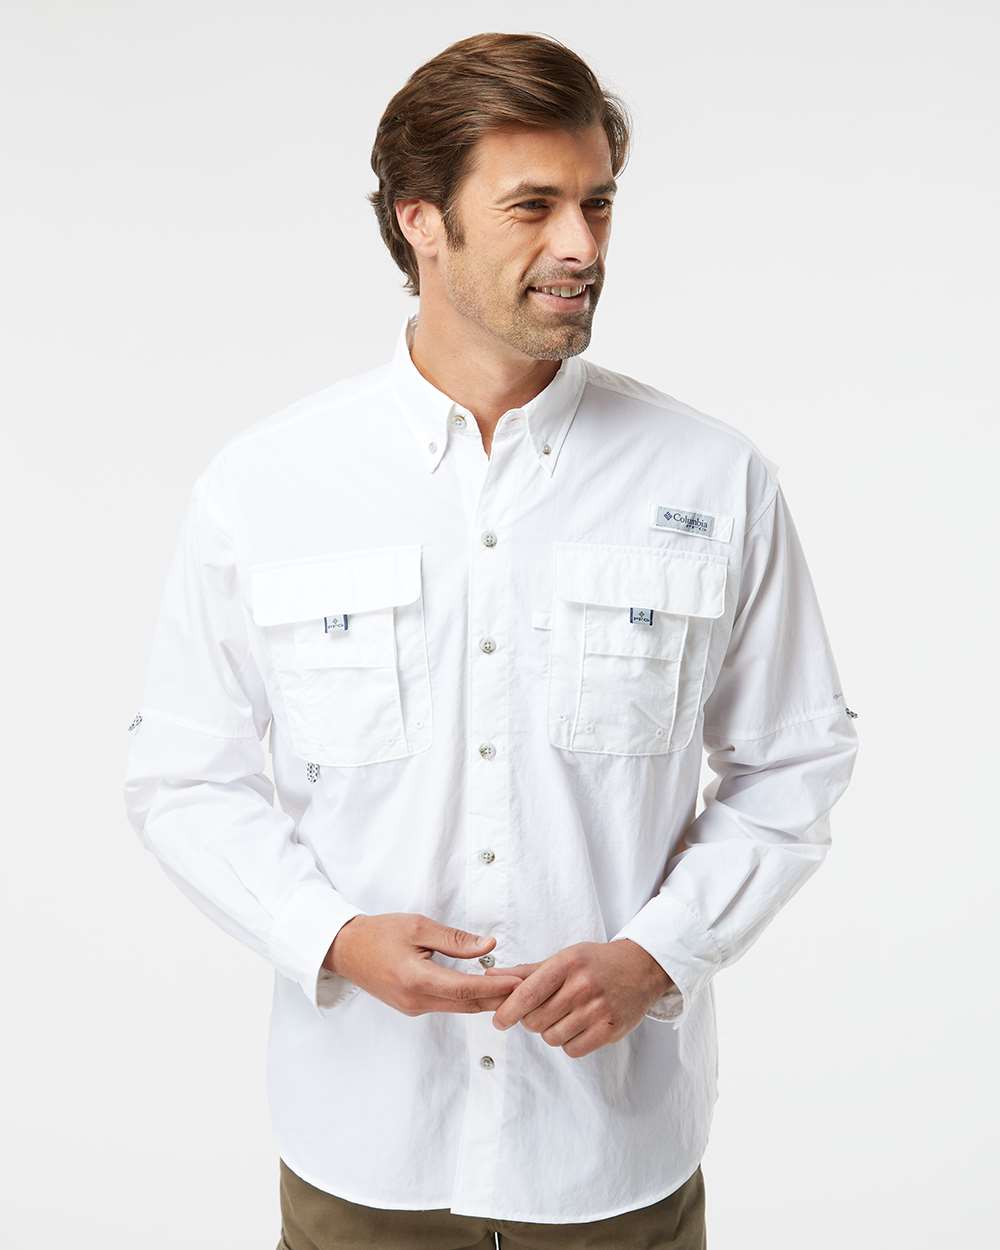 Columbia - PFG Bahama™ II Long Sleeve Shirt, 3 oz./yd², 100% Tactel nylon  taffeta, Discover the Ultimate Comfort and Sophistication in Our Men's  Best Premium Long Sleeve Shirt